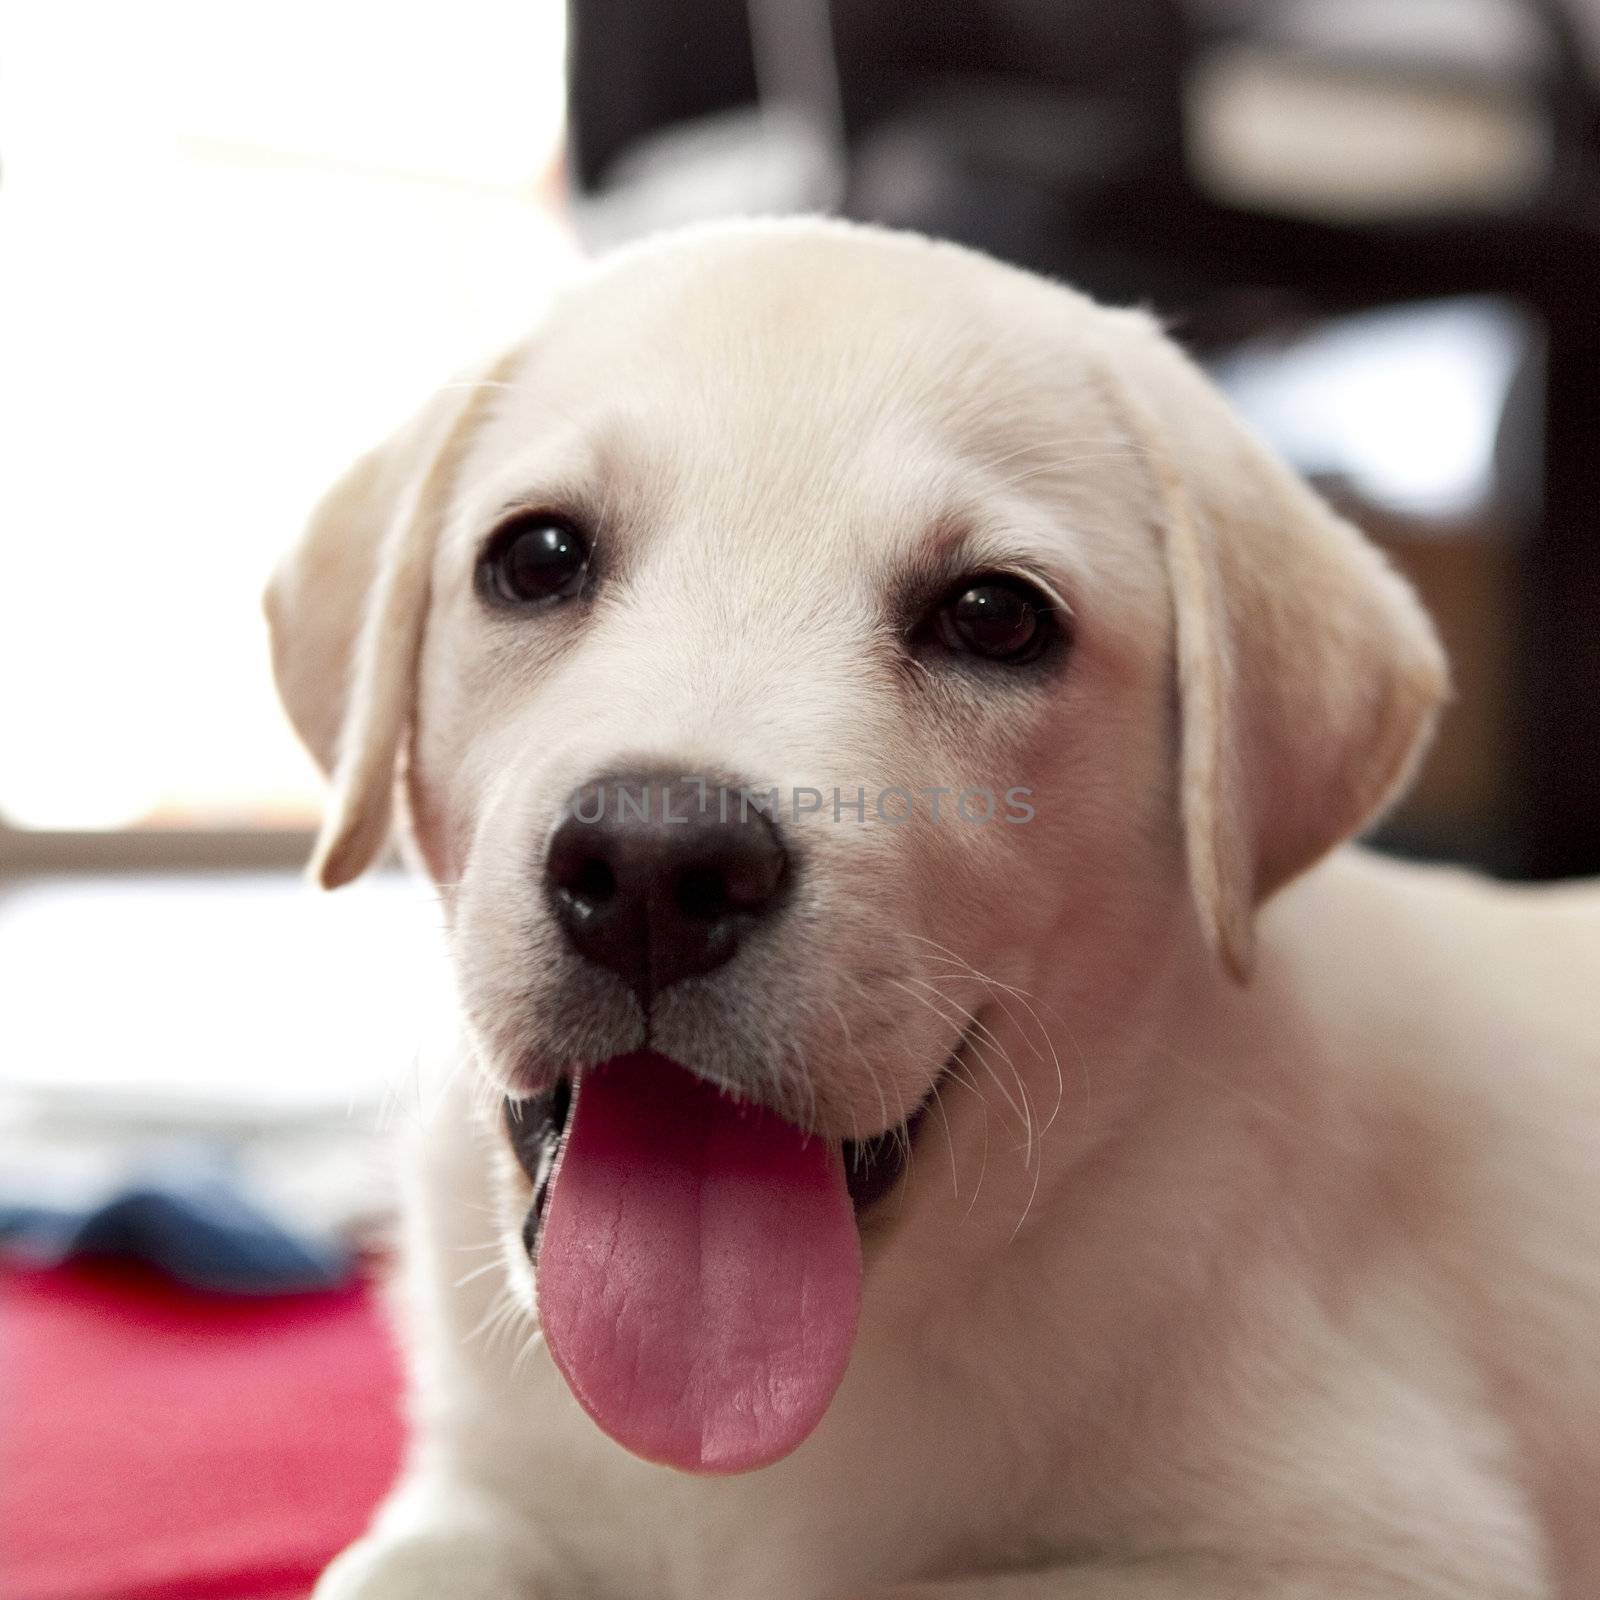 Labrador baby by Iko